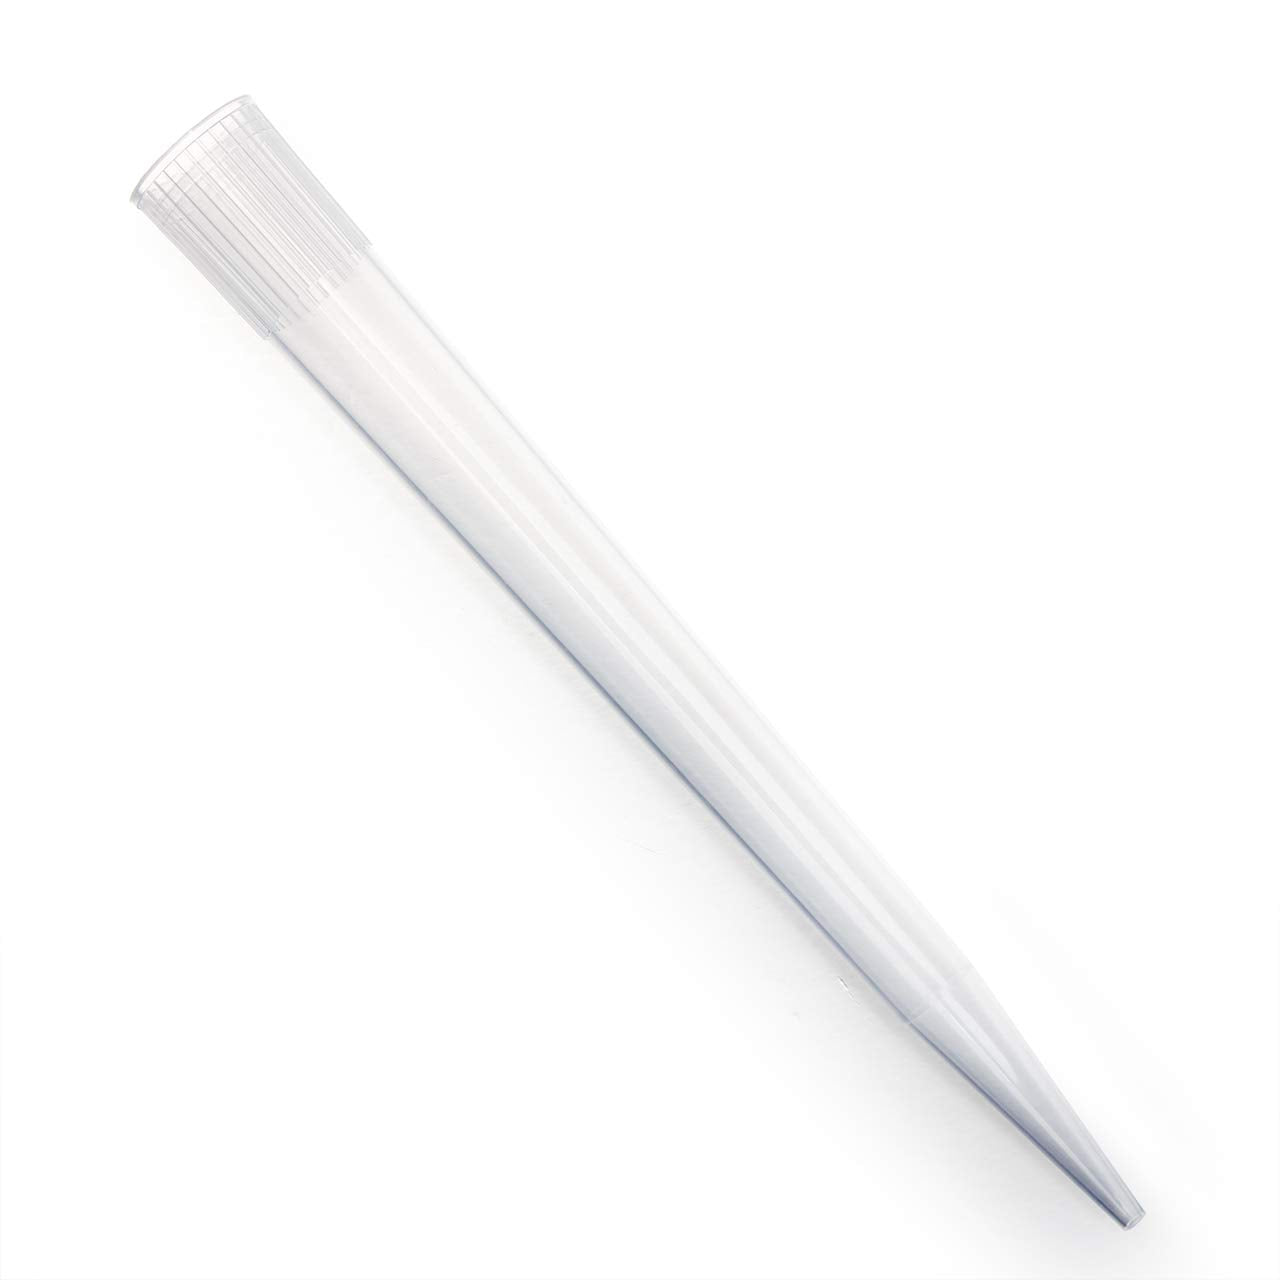 10mL Pipette Tips, 10 mL Universal Micro Pipette Tip, Polypropylene (P ...